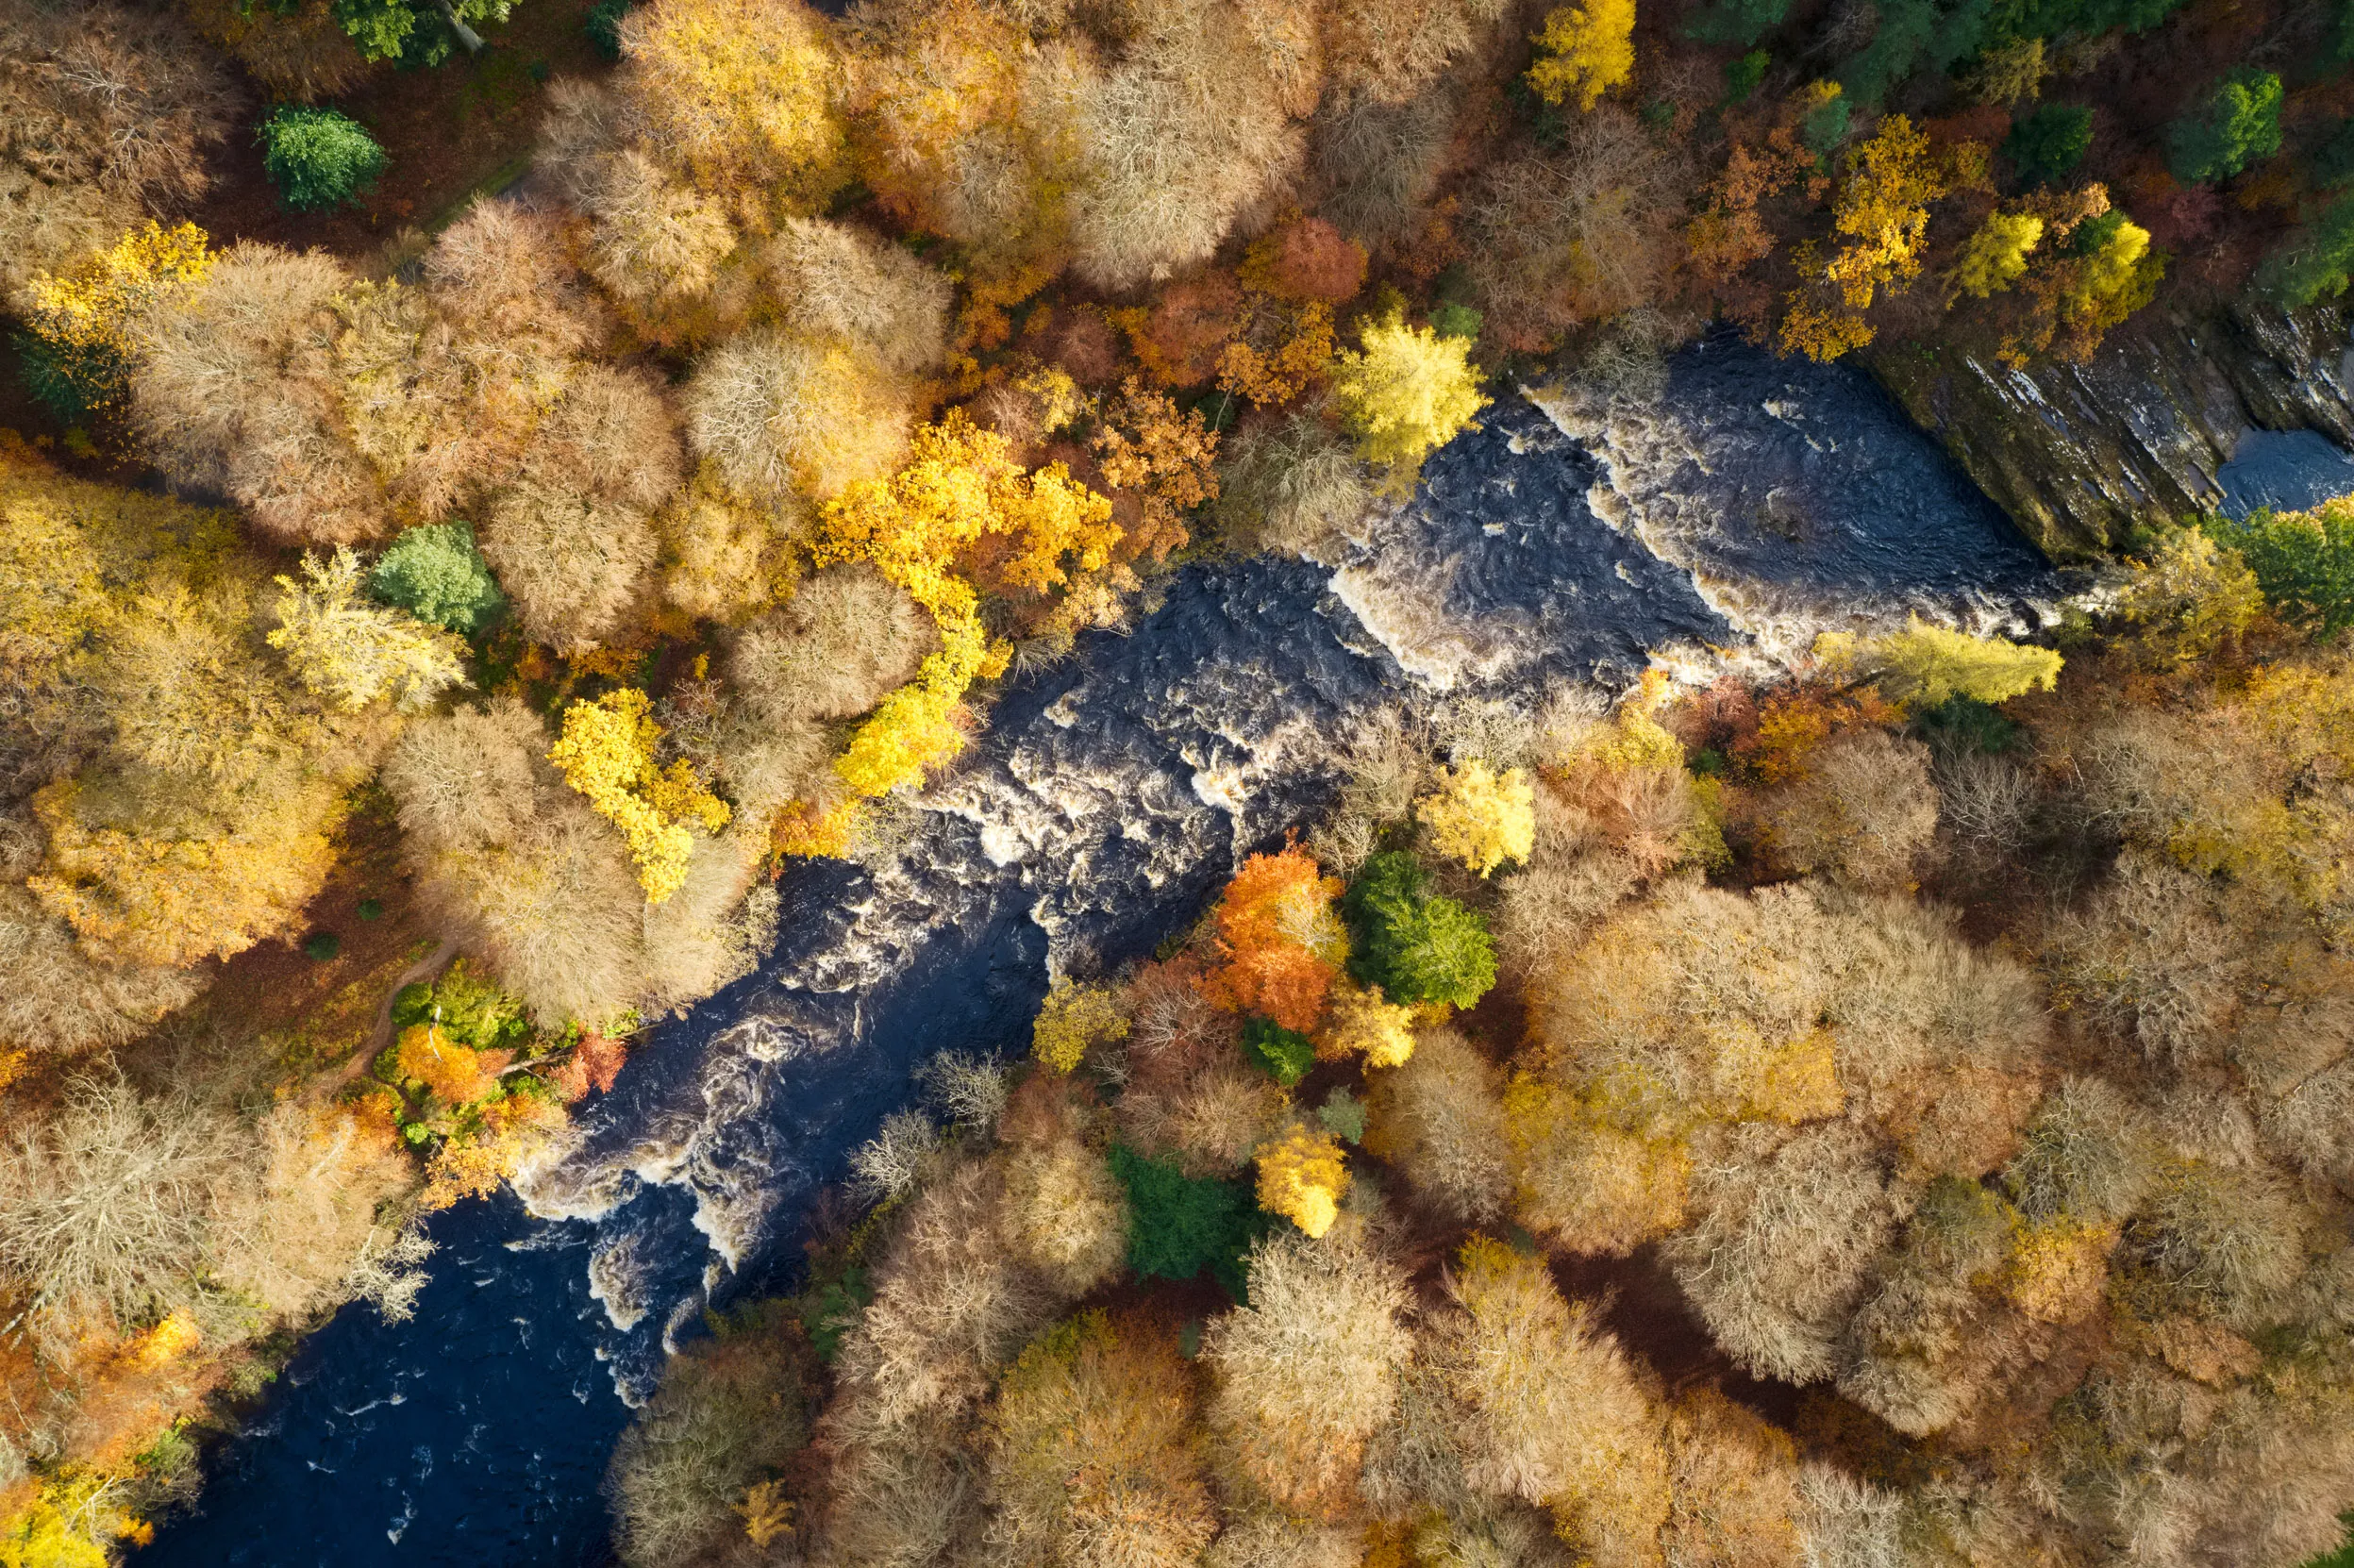 A drone shot of river Esk Glenesk, Scotland, surrounded by a body of yellow and brown leaved trees.